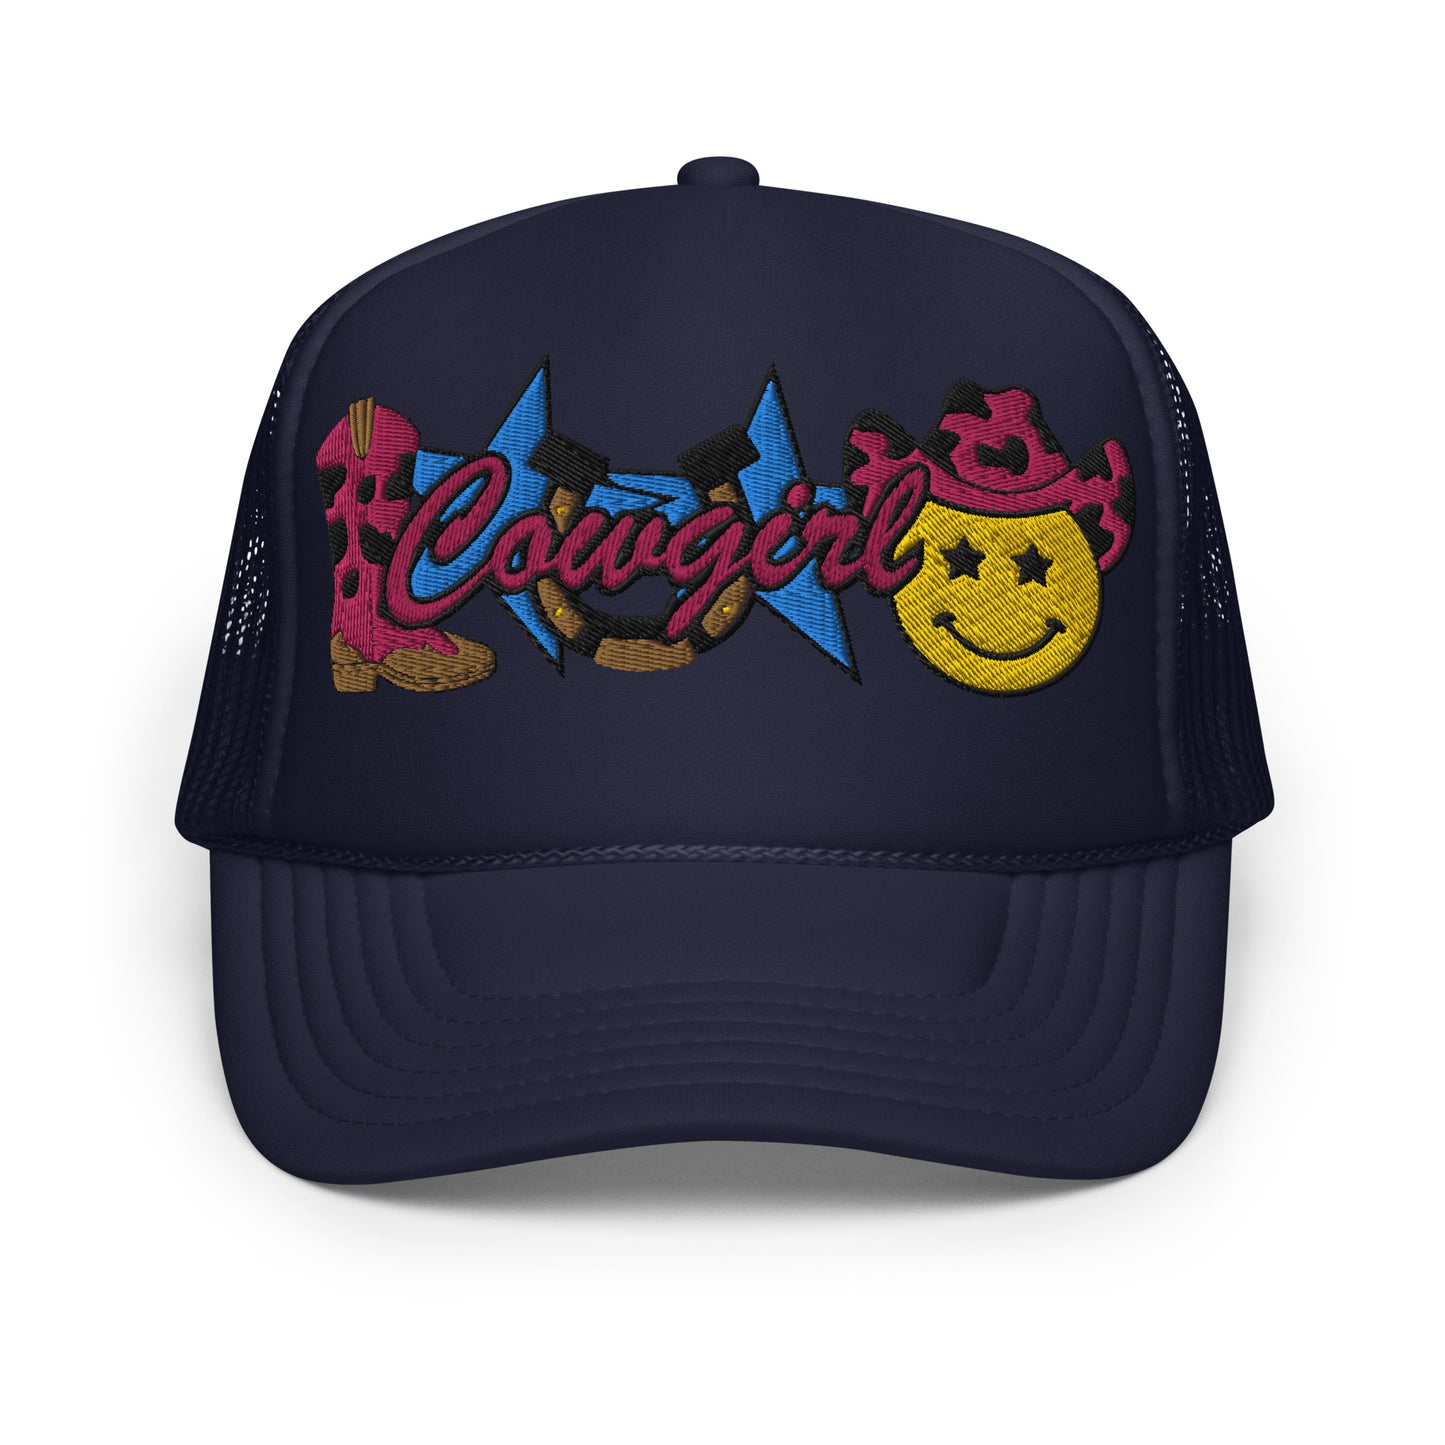 Cowgirl Embroidered Patches Otto Foam Trucker Hat